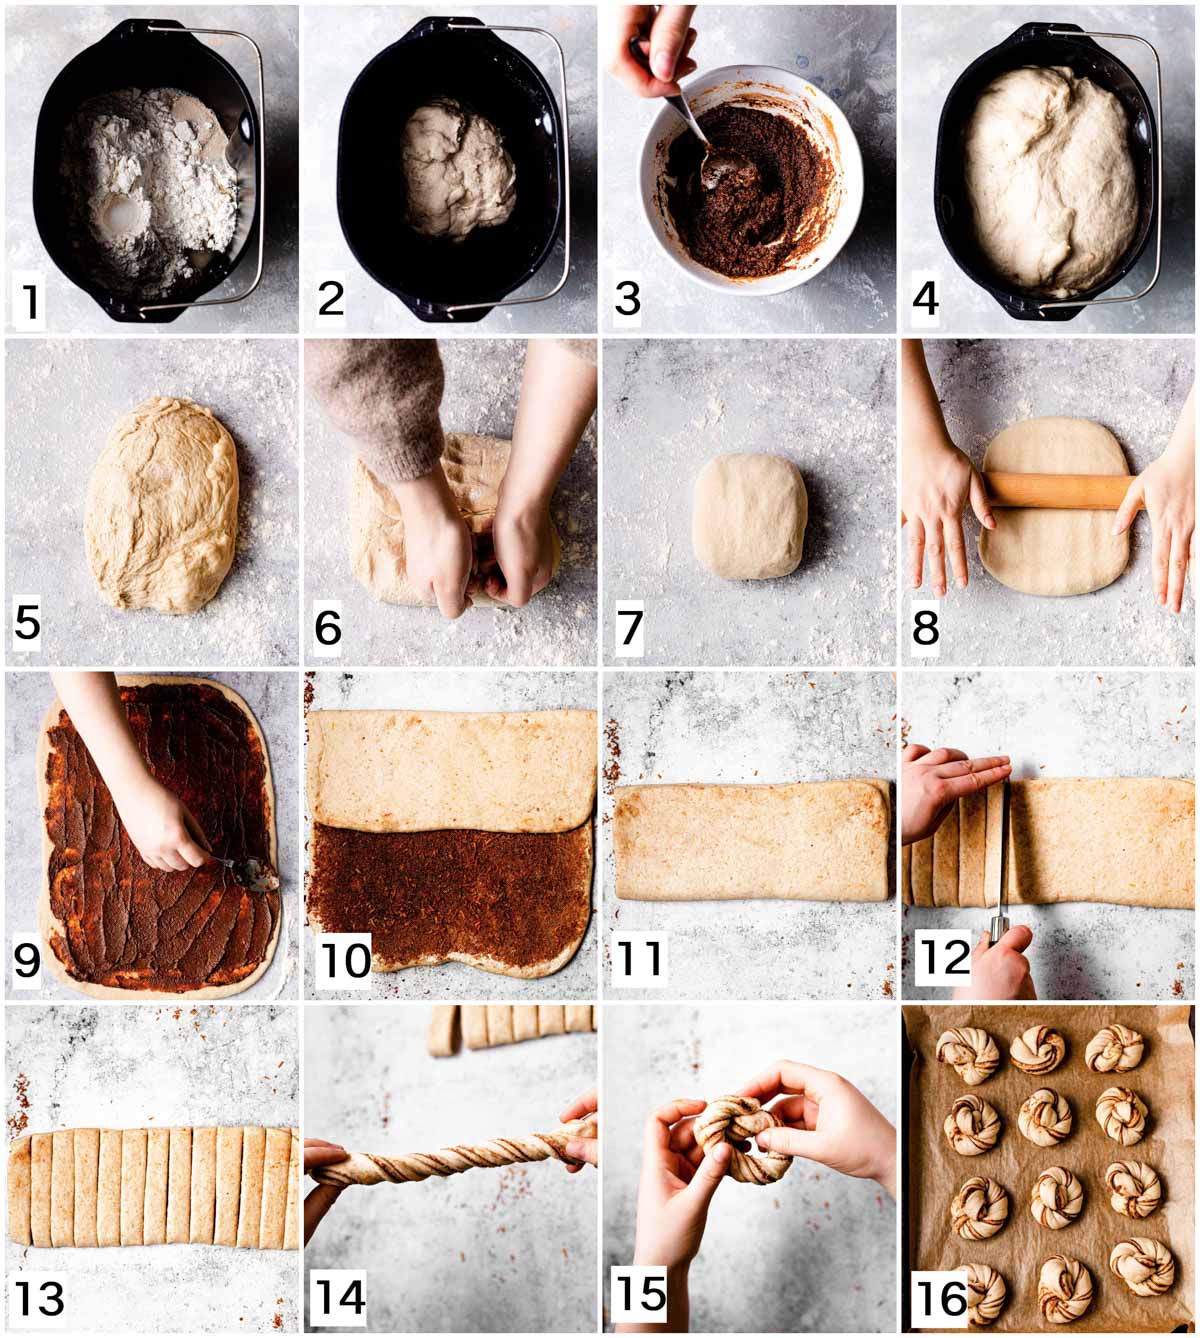 A collage of images showing 16 steps in making pumpkin rolls.